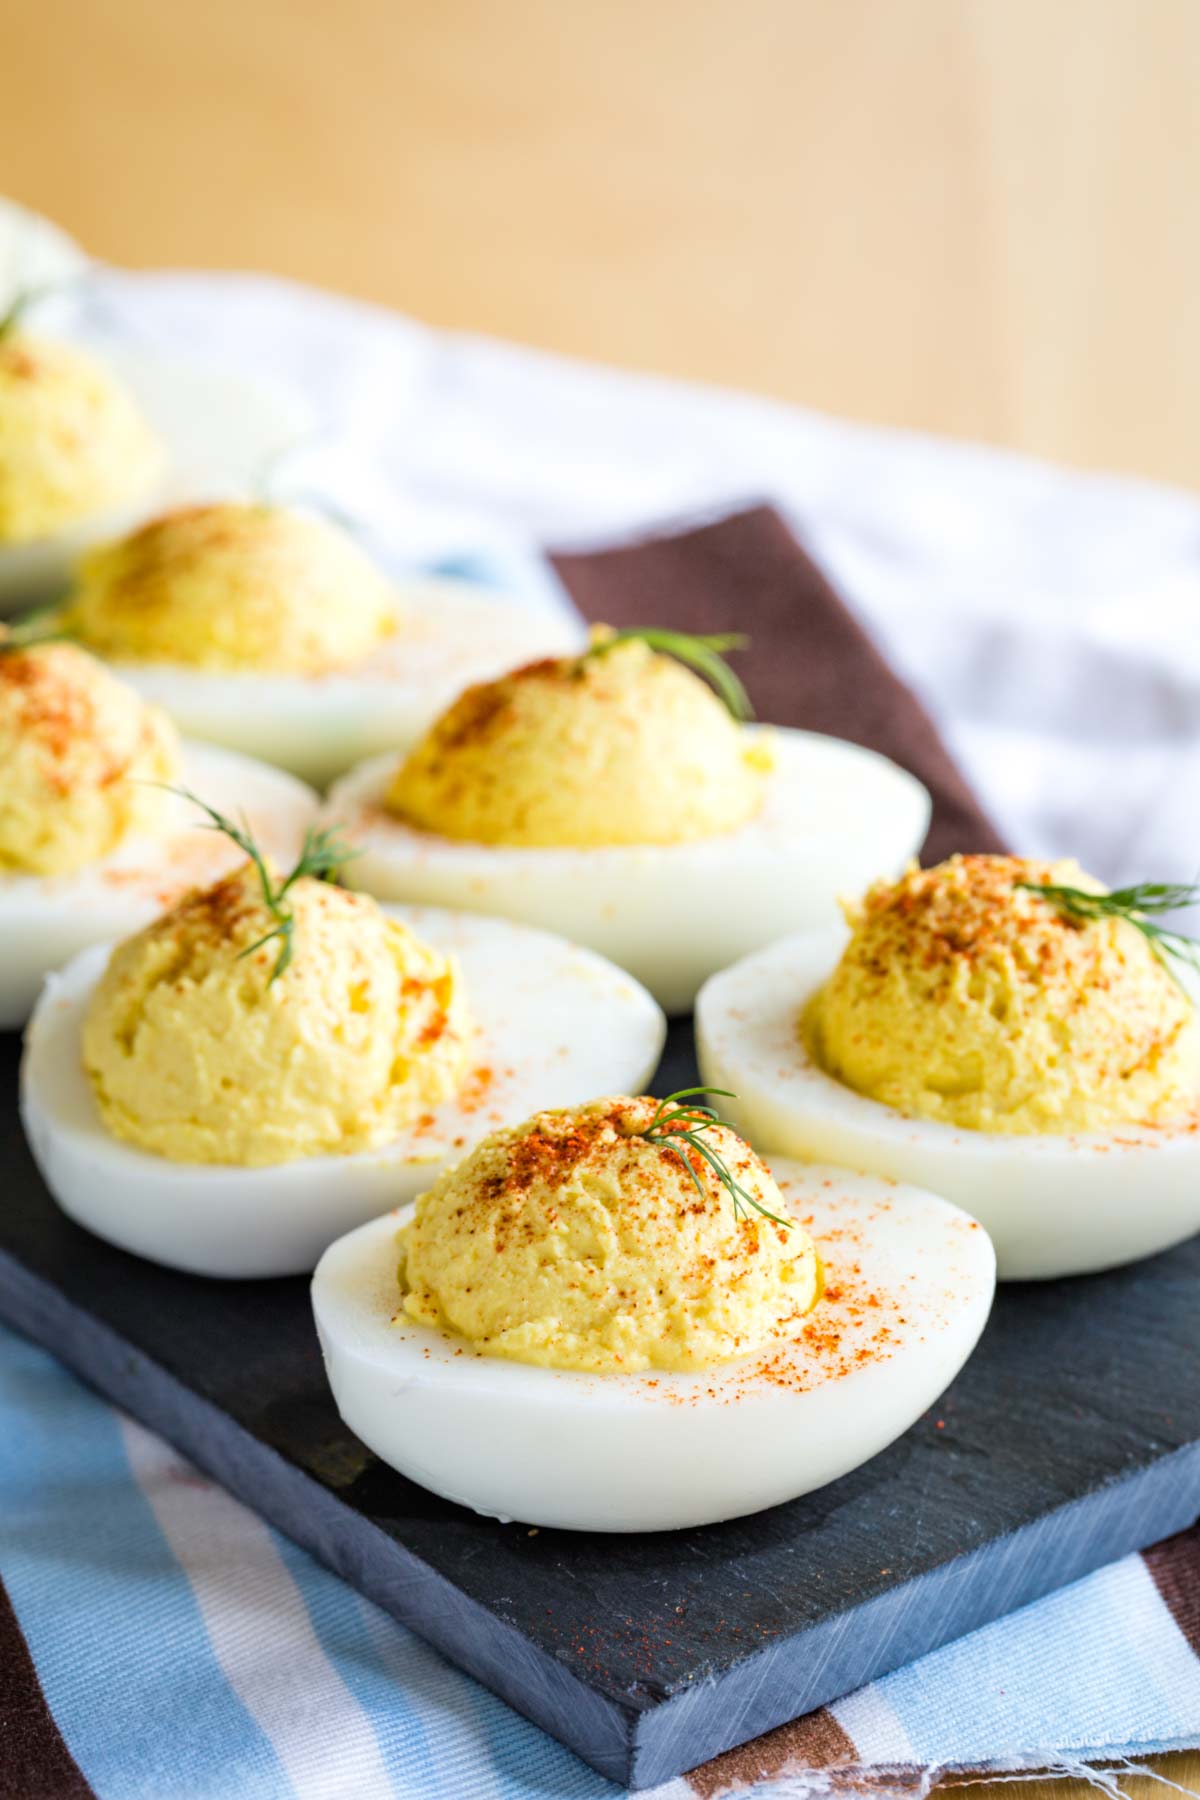 Greek Yogurt Deviled Eggs garnished with paprika and dill on a slate tray on top of a striped cloth napkin.